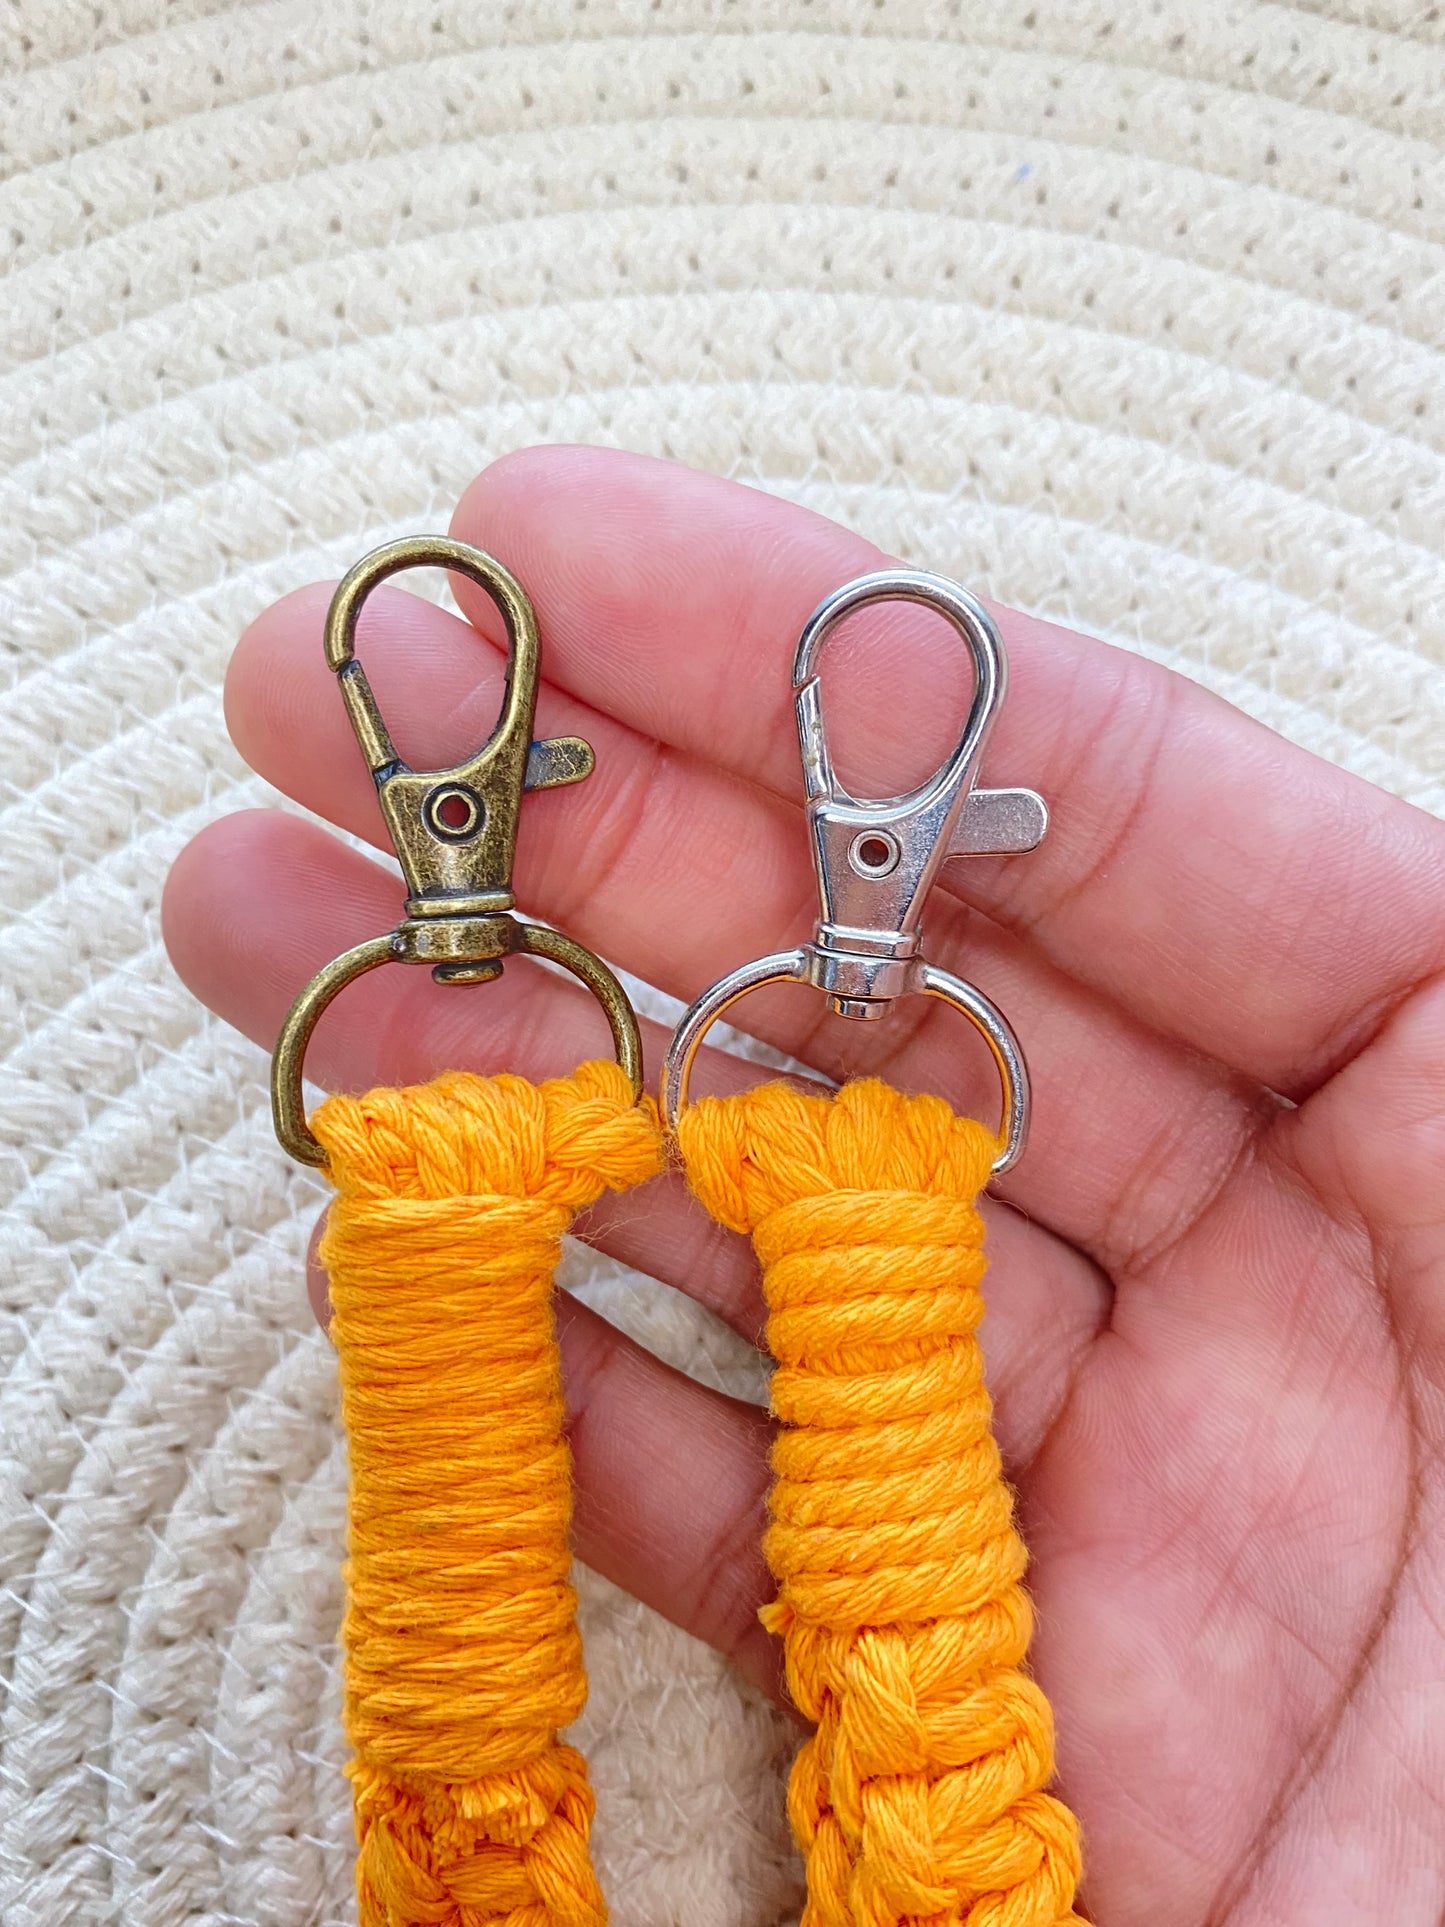 How to Make a Rope Keychain